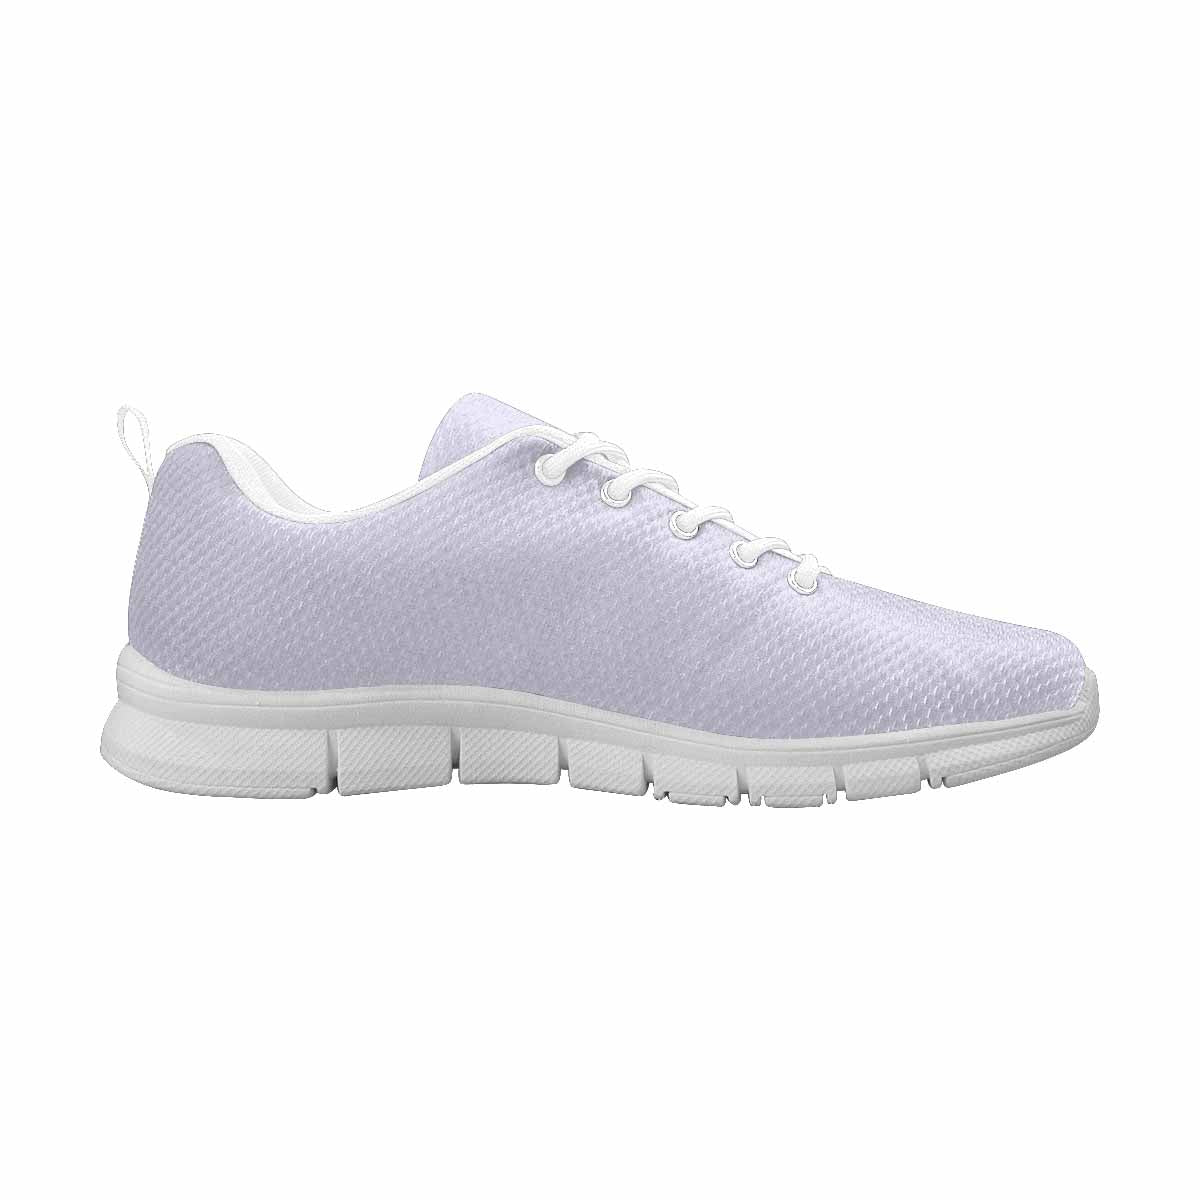 Sneakers For Men,    Lavender Purple   - Running Shoes